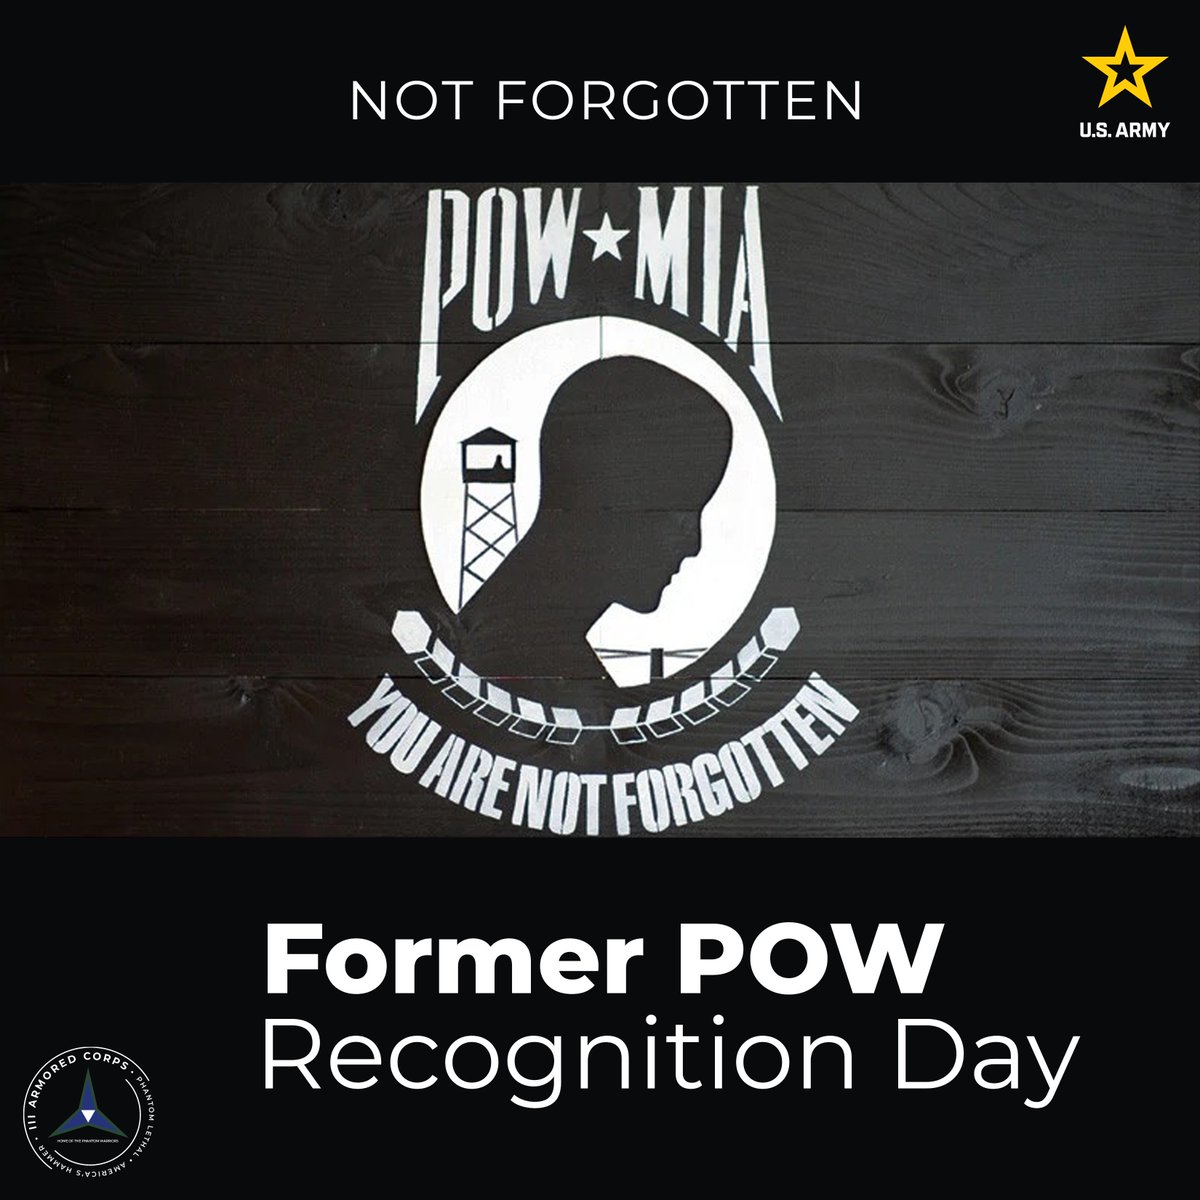 On National Former POW Recognition Day, we honor those who sacrificed their freedom at the hands of the enemy. We will never fail to honor your service. #HonorOurHeroes #POWMIA #POWRecognitionDay #PhantomWarriors